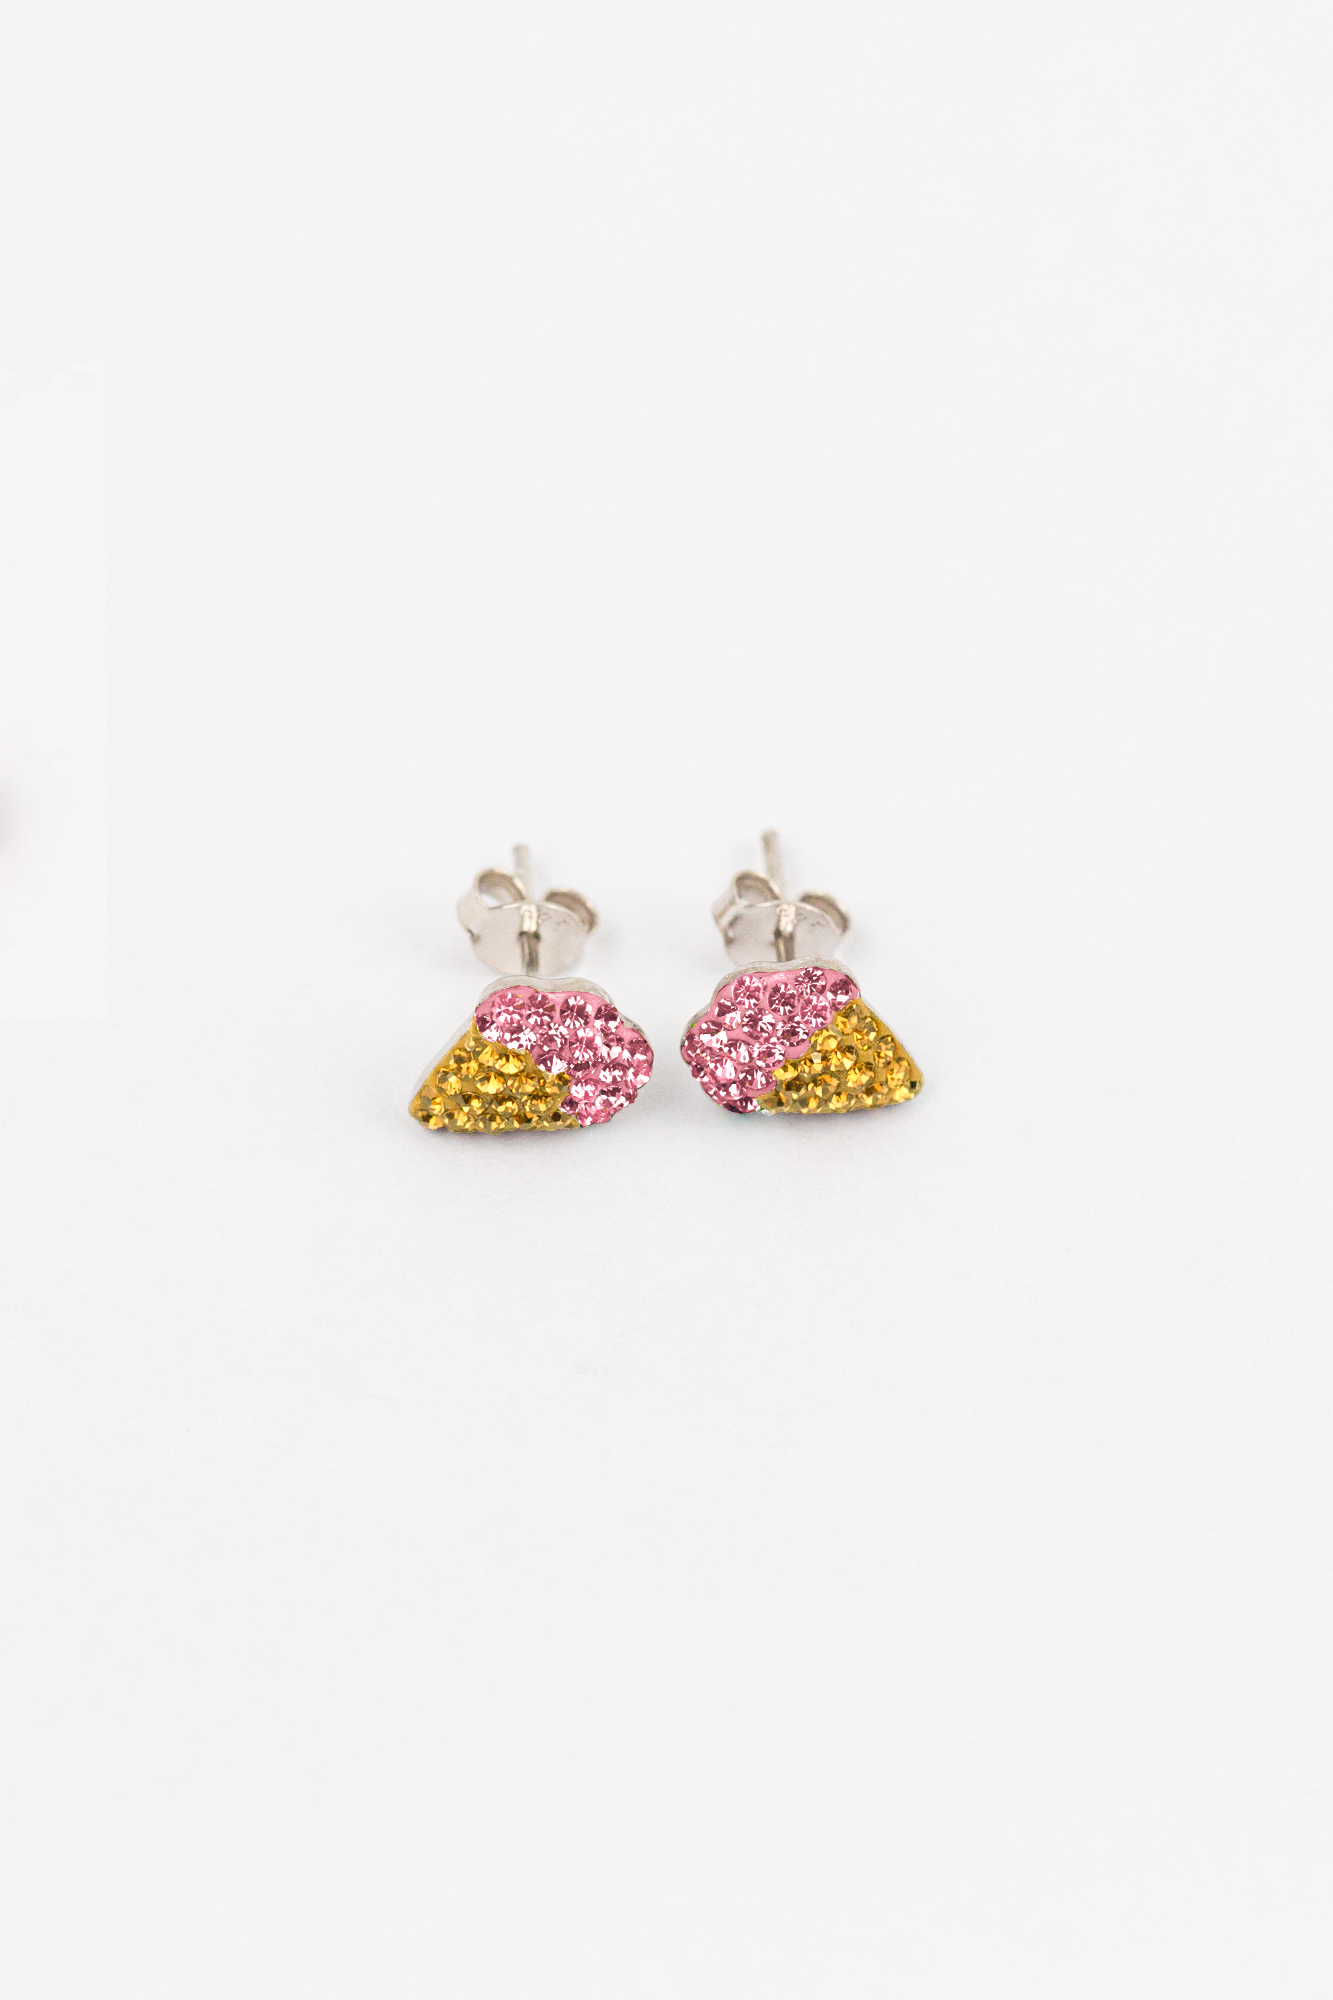 Strawberry Ice Cream Cone Crystal Stud Sterling Silver Earrings | Annie & Sisters